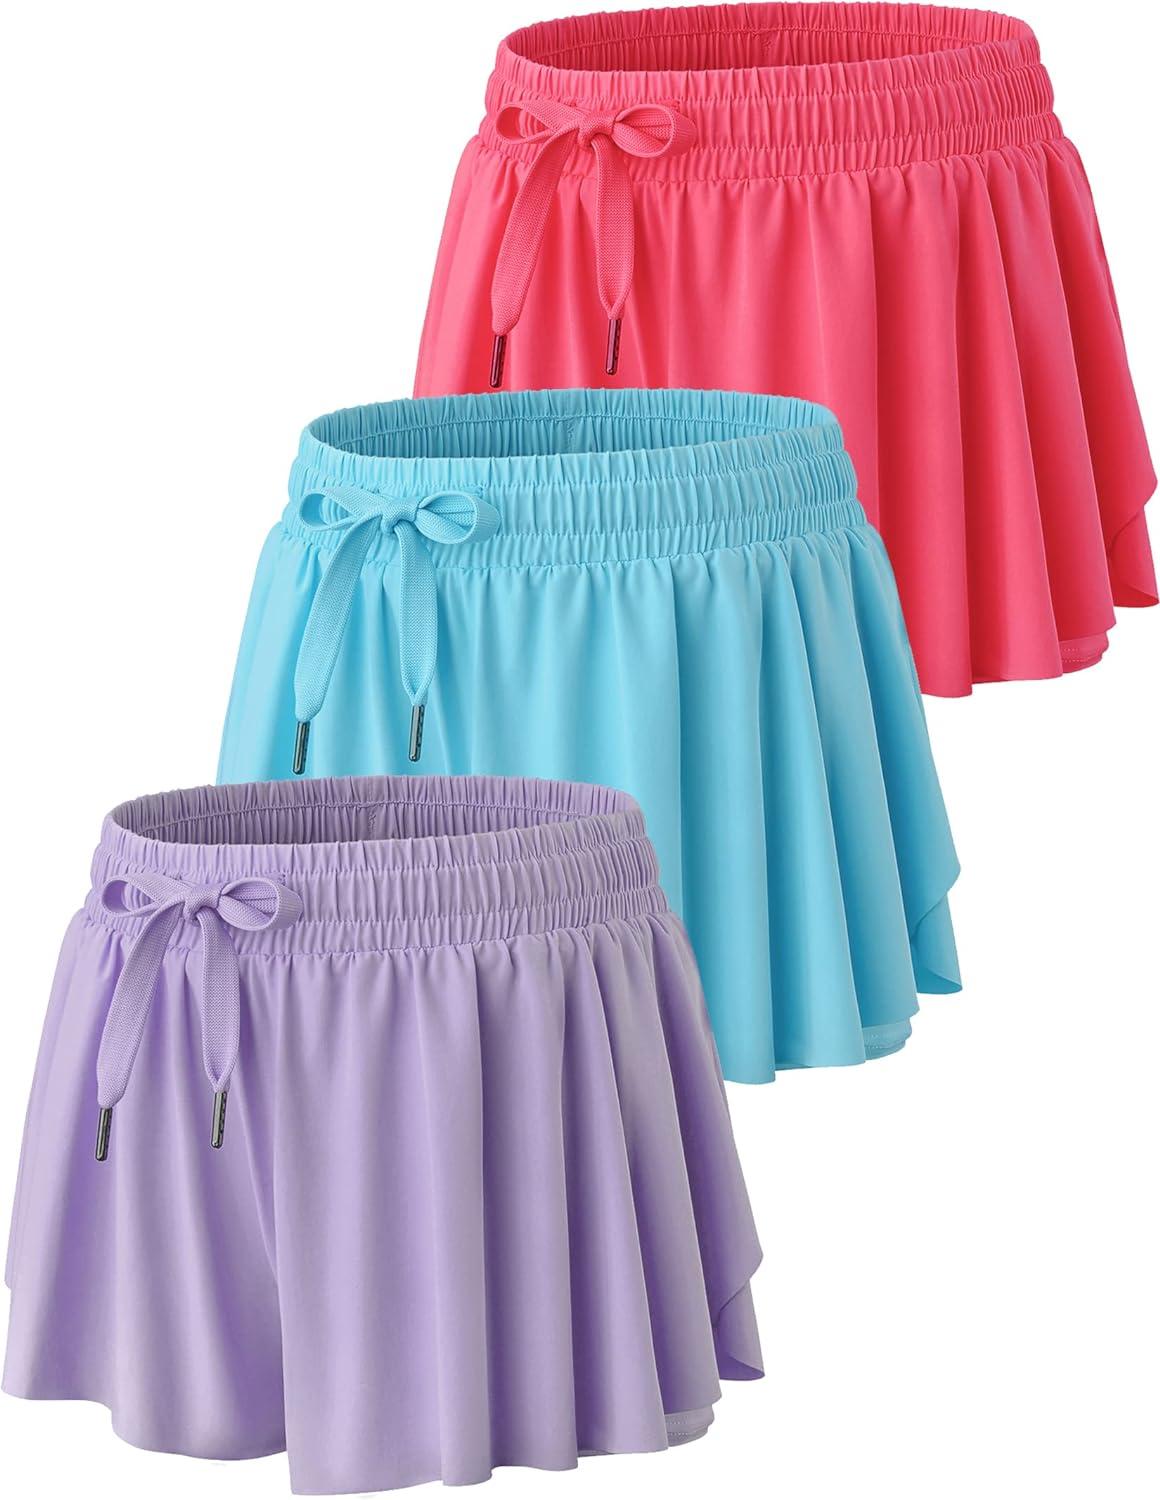  4 Pack Youth Girls Athletic Shorts 3, Girls Soccer